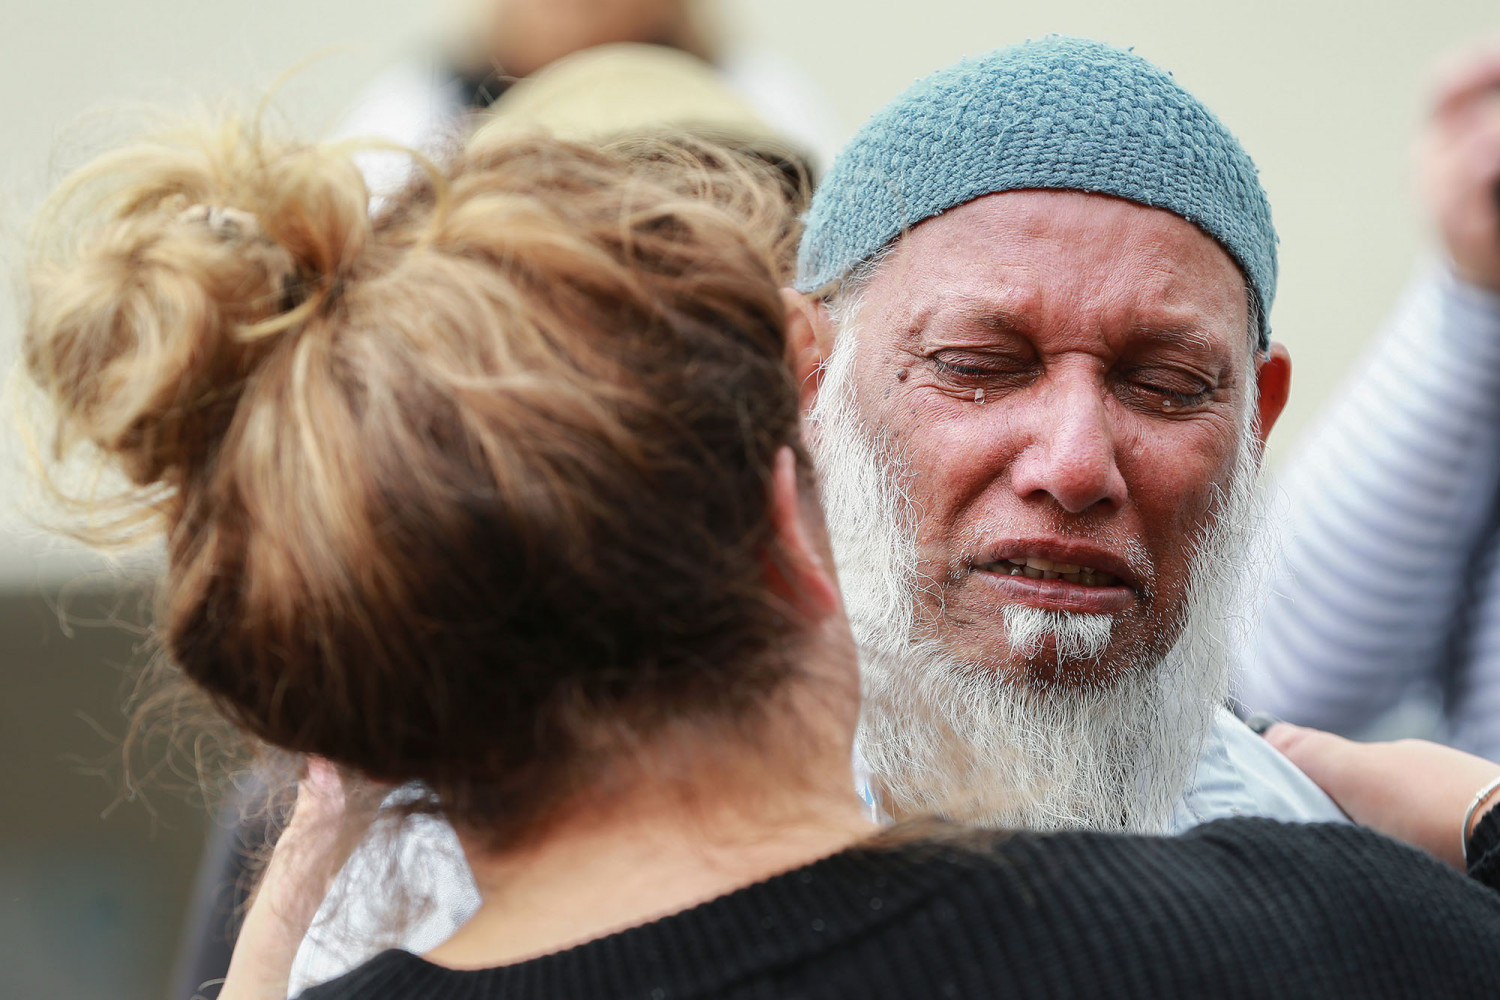 Compensation Flows to Victims and Families of Christchurch Mosque Attacks